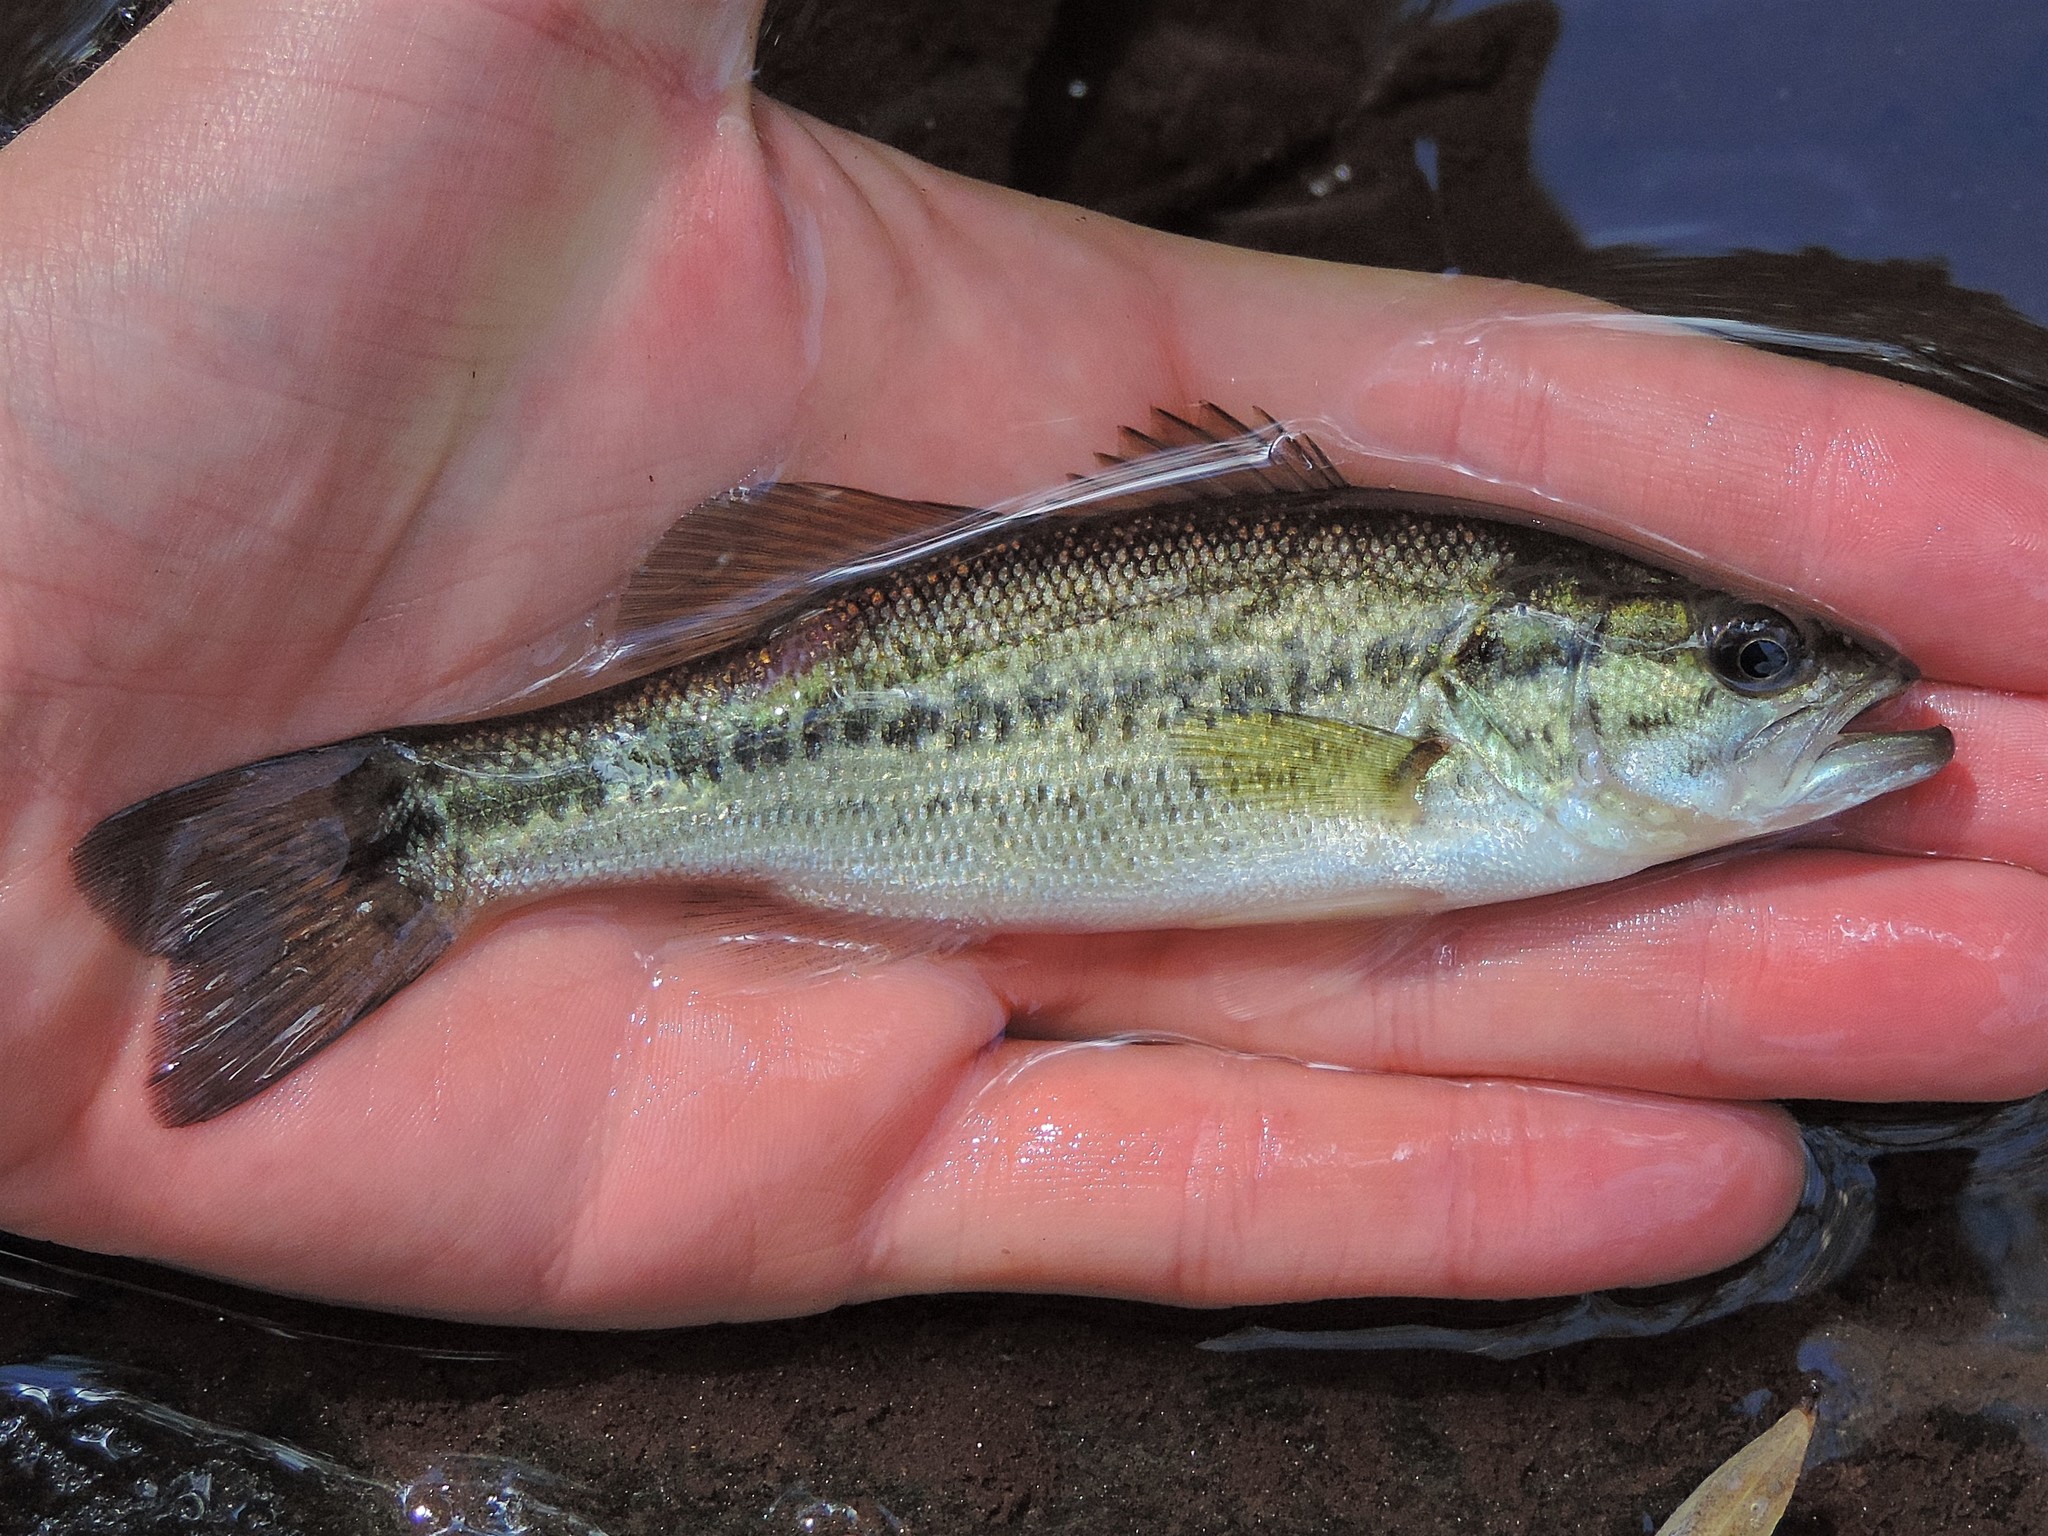 Maryland Biodiversity Project - Largemouth Bass (Micropterus nigricans)